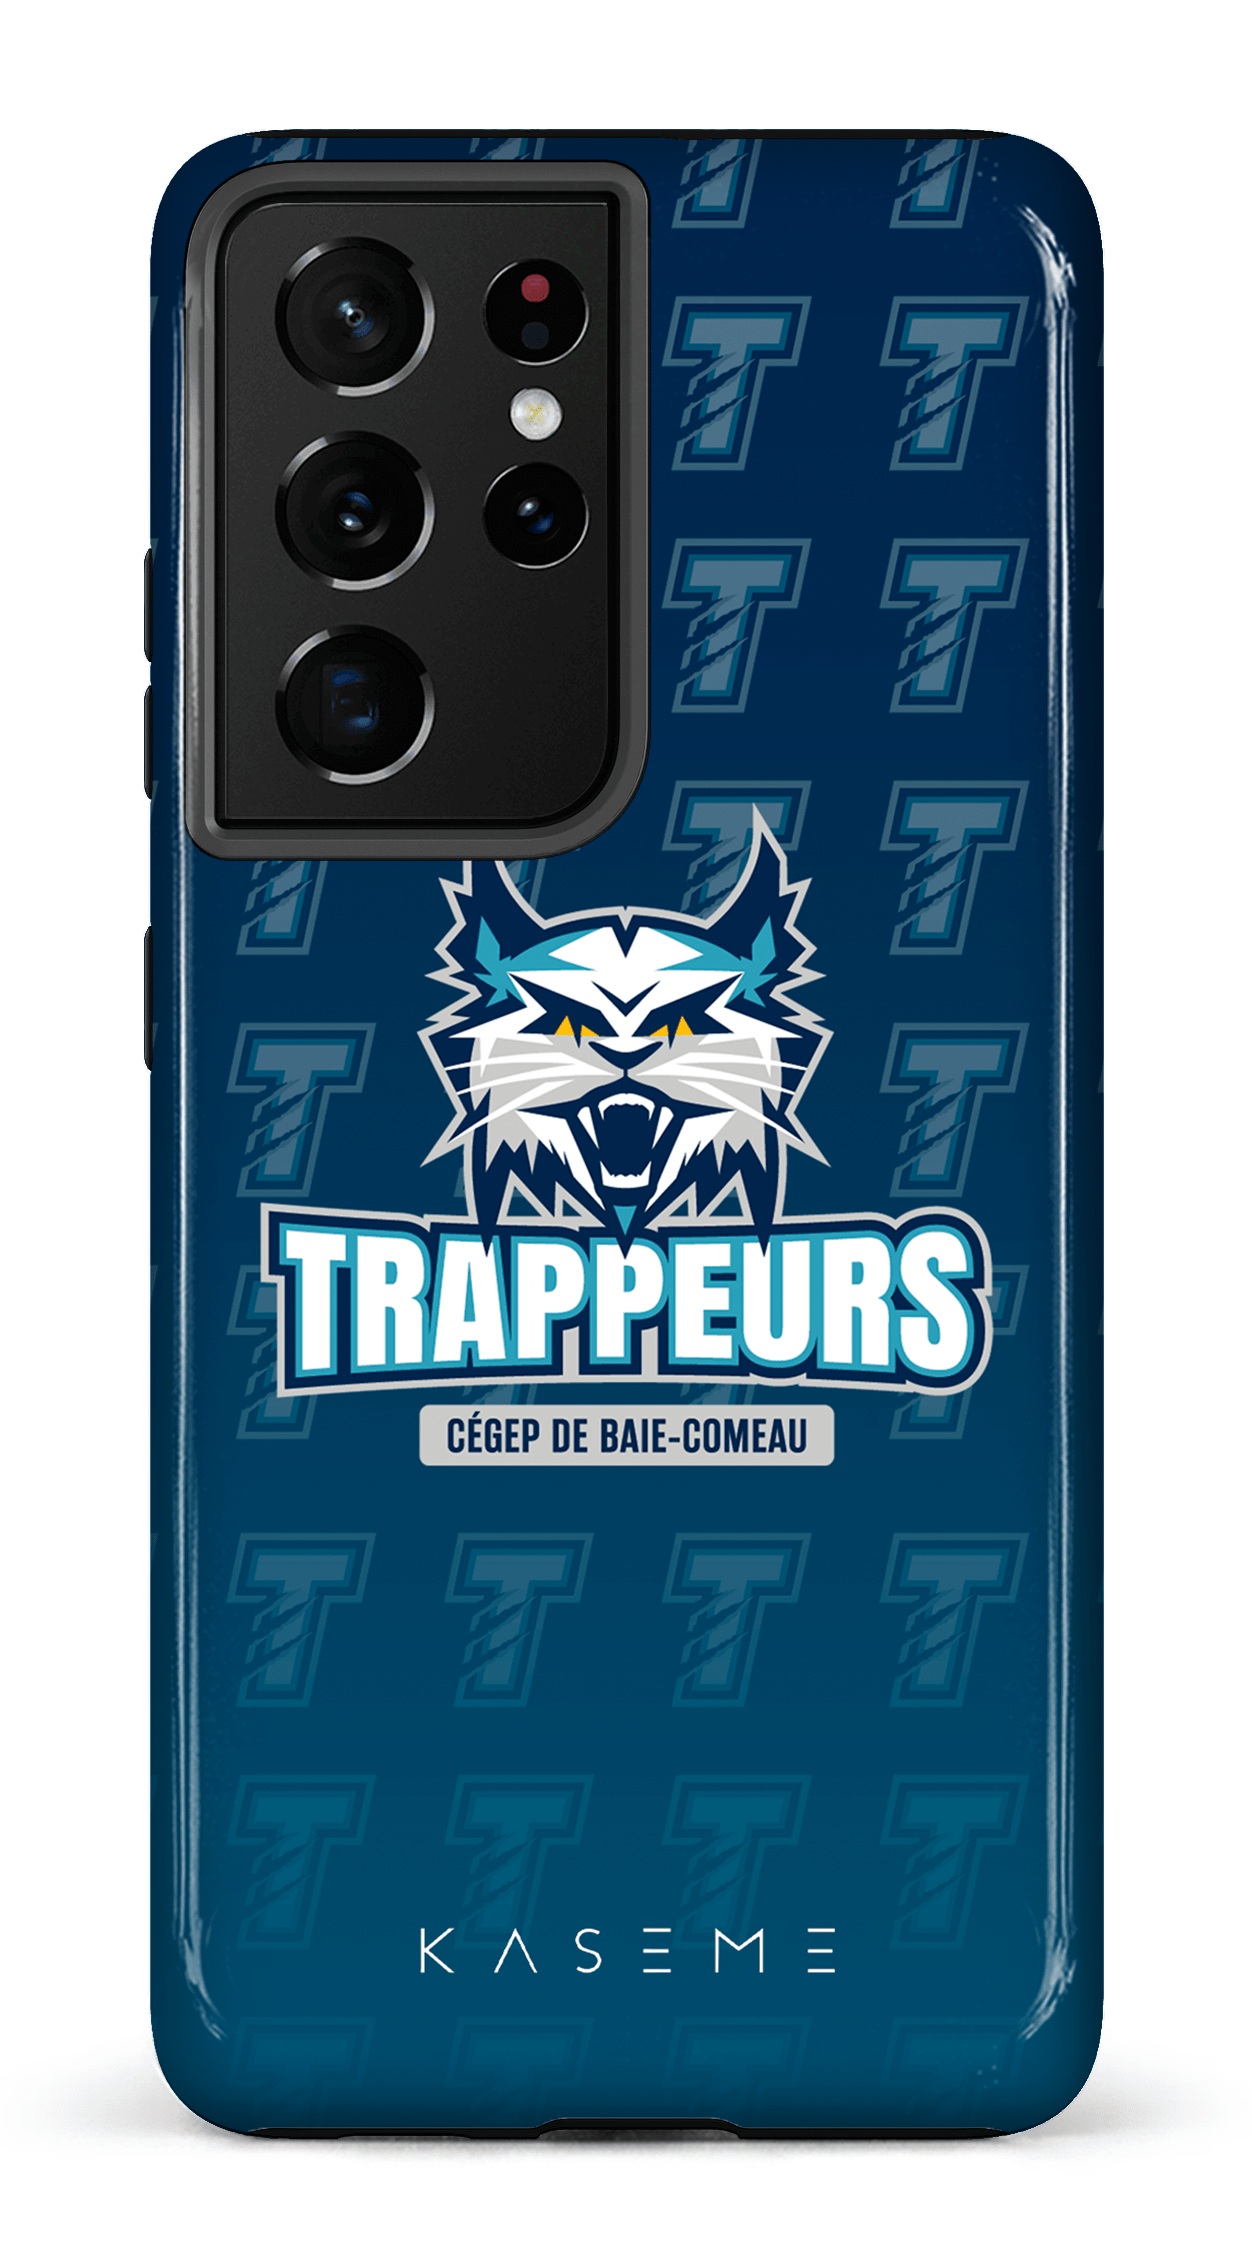 Trappeurs CBC - Galaxy S21 Ultra